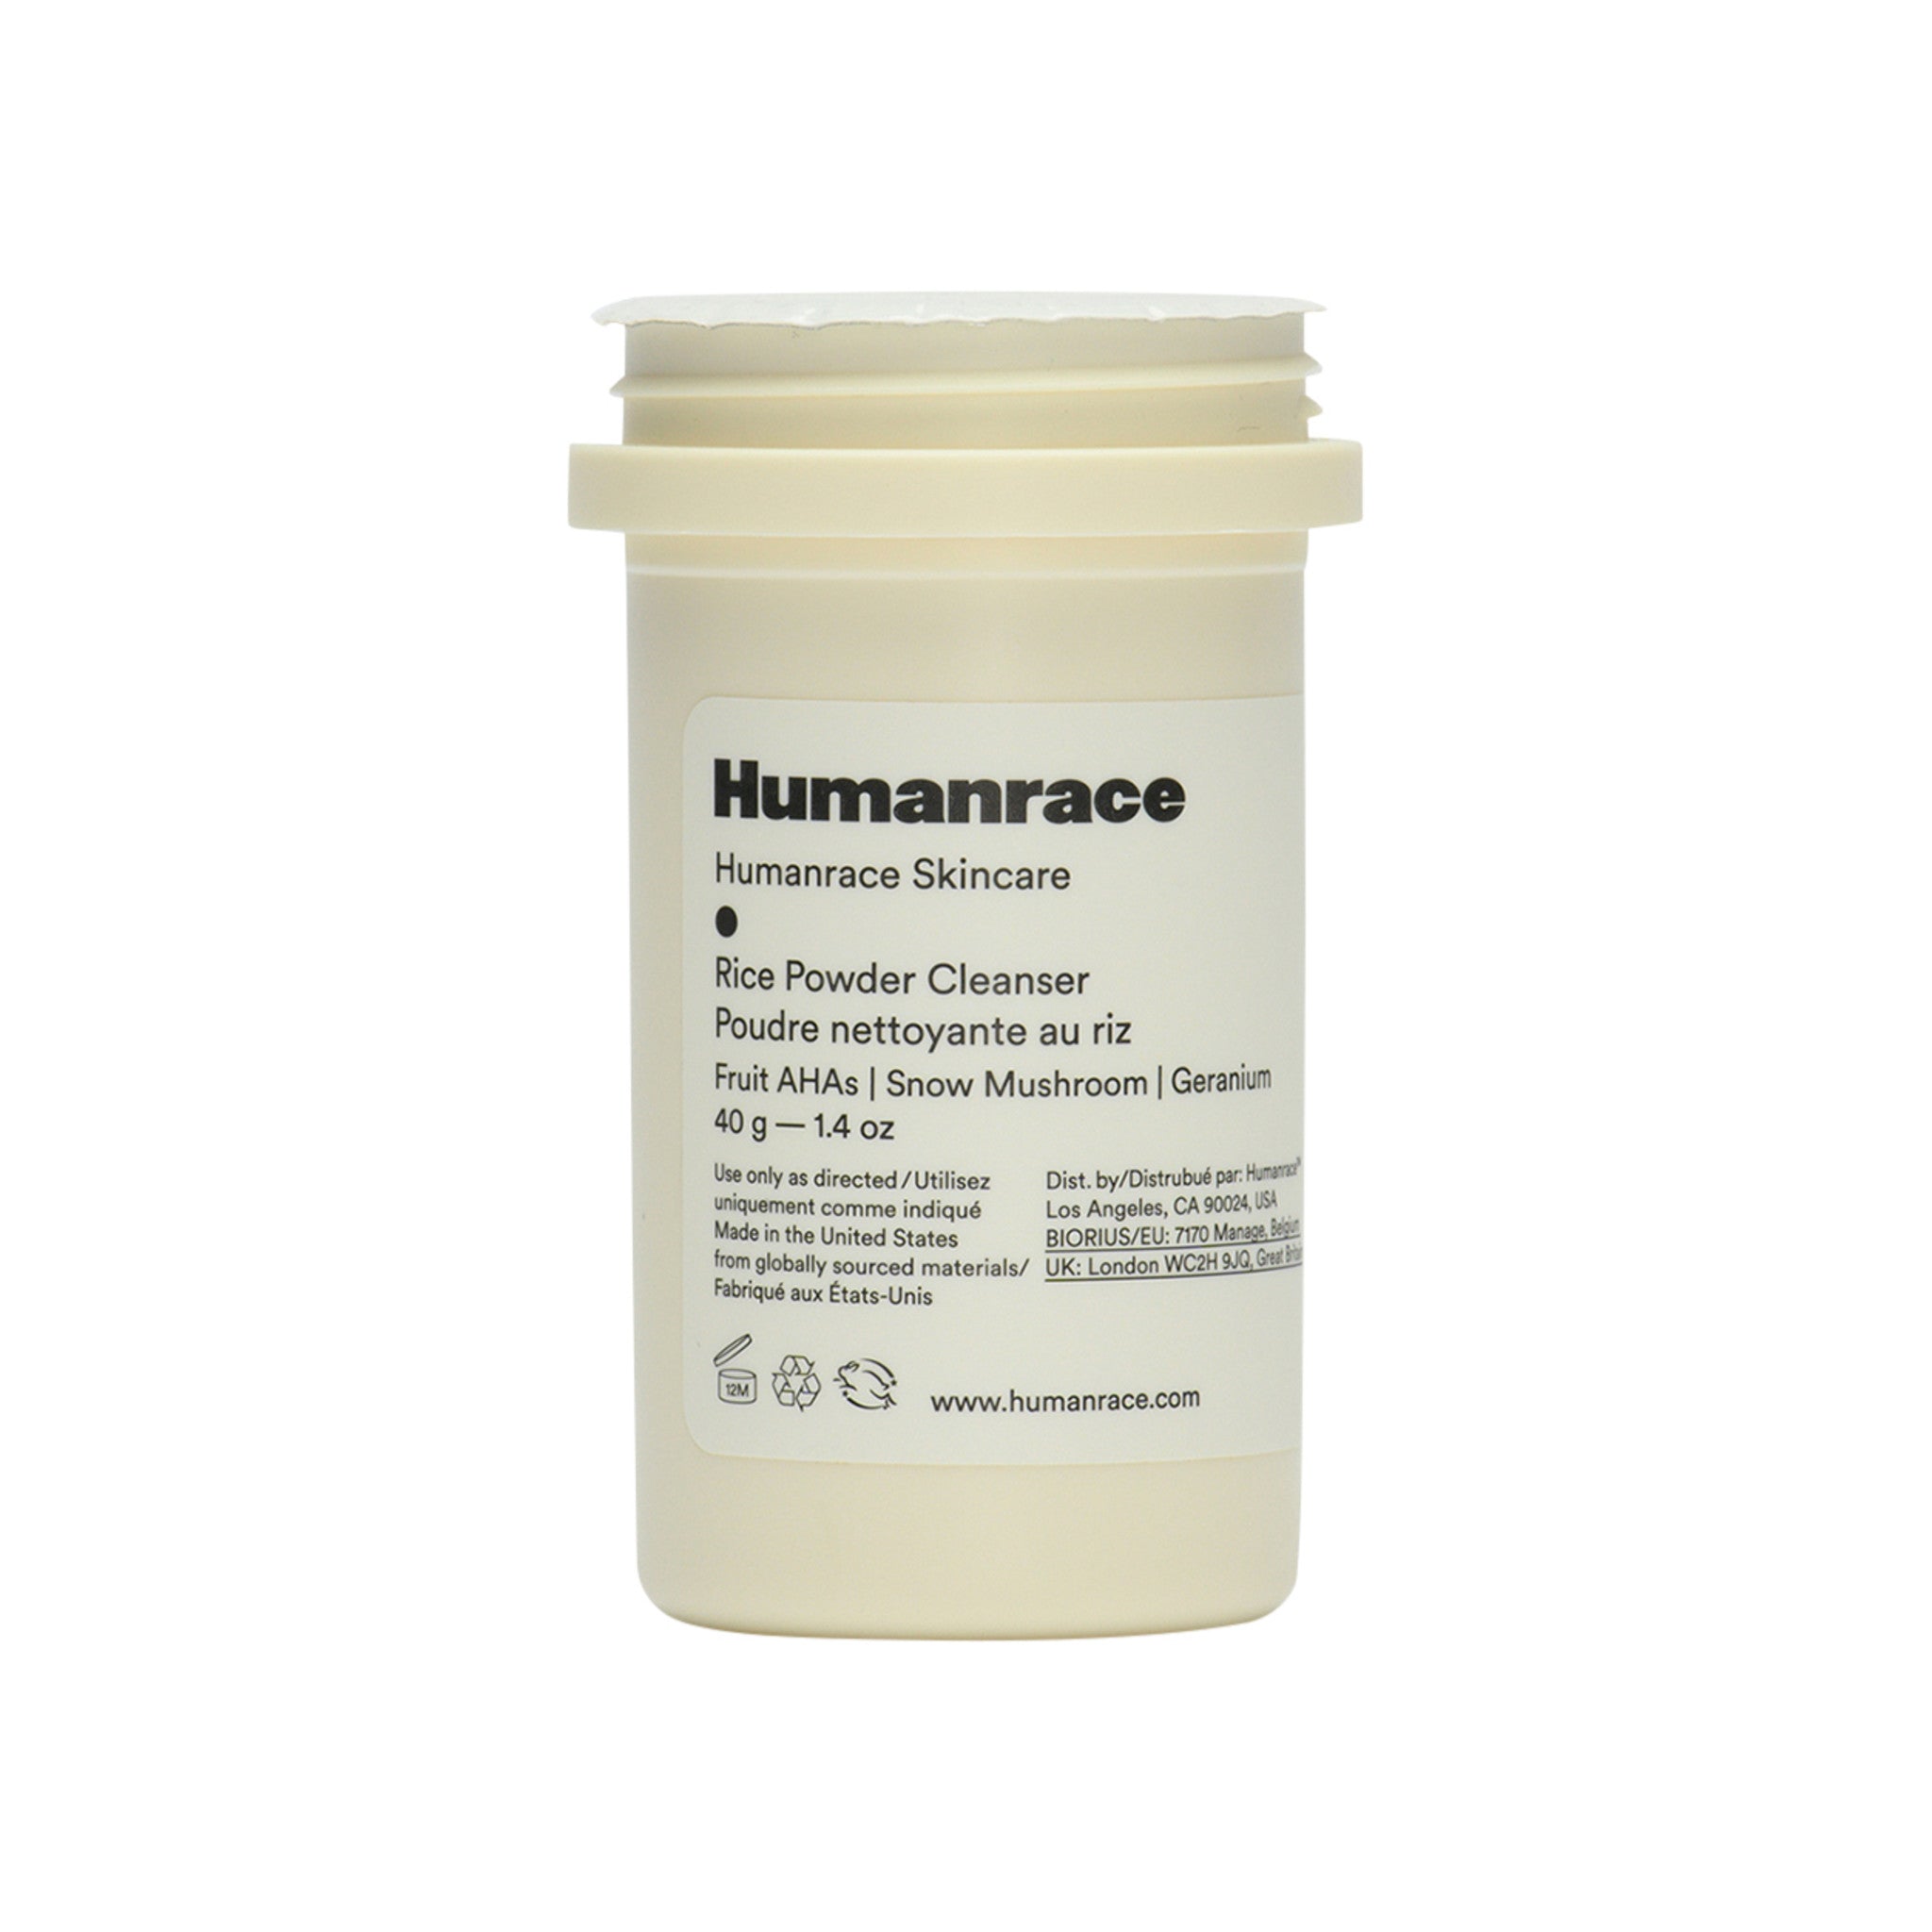 Humanrace Rice Powder Cleanser Refill main image.